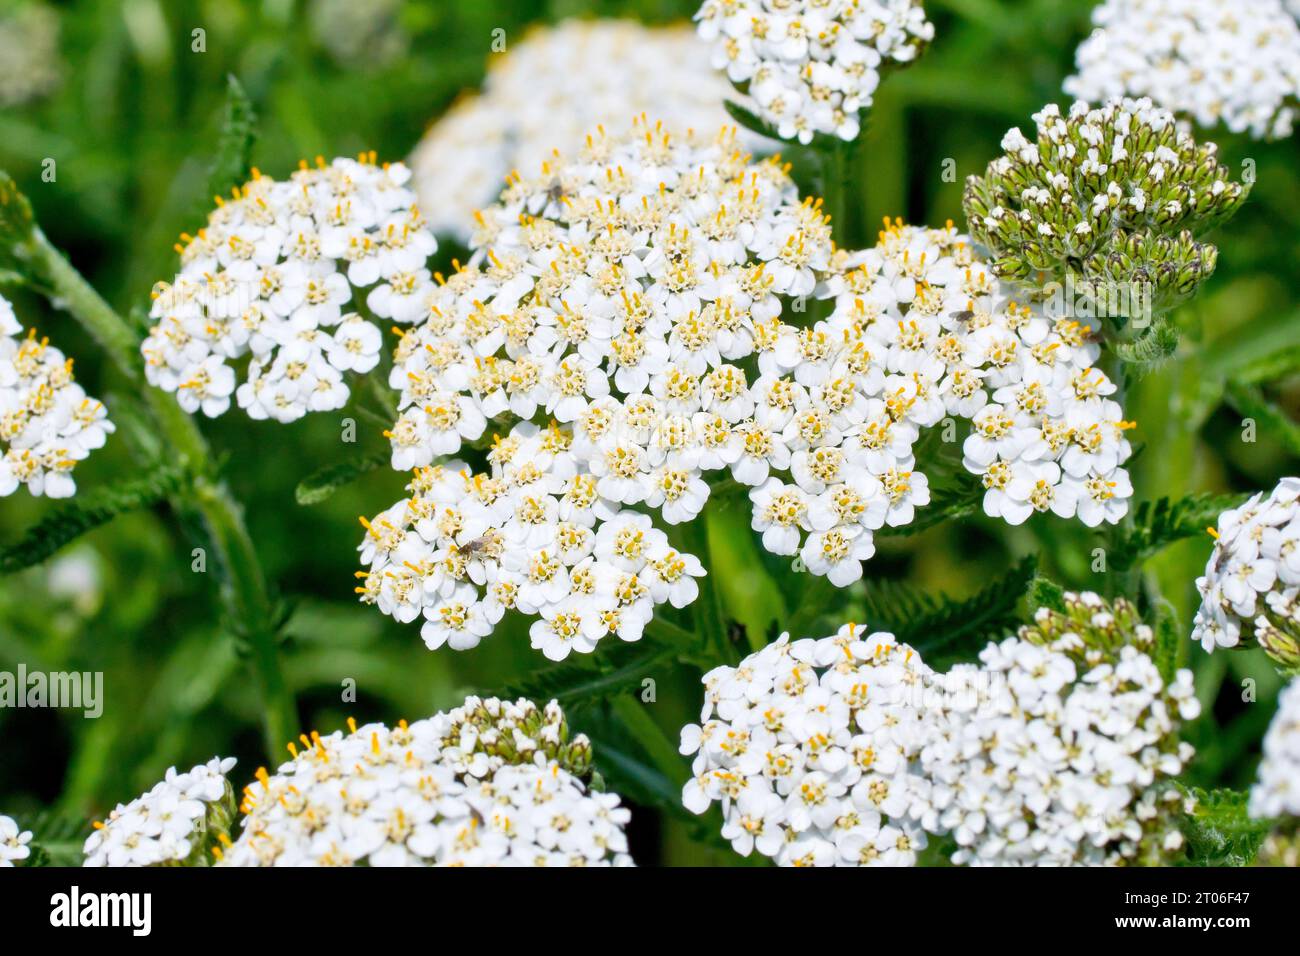 Yarrow (achillea millefolium), close up focusing on a single large flowerhead out of many, with buds yet to flower. Stock Photo